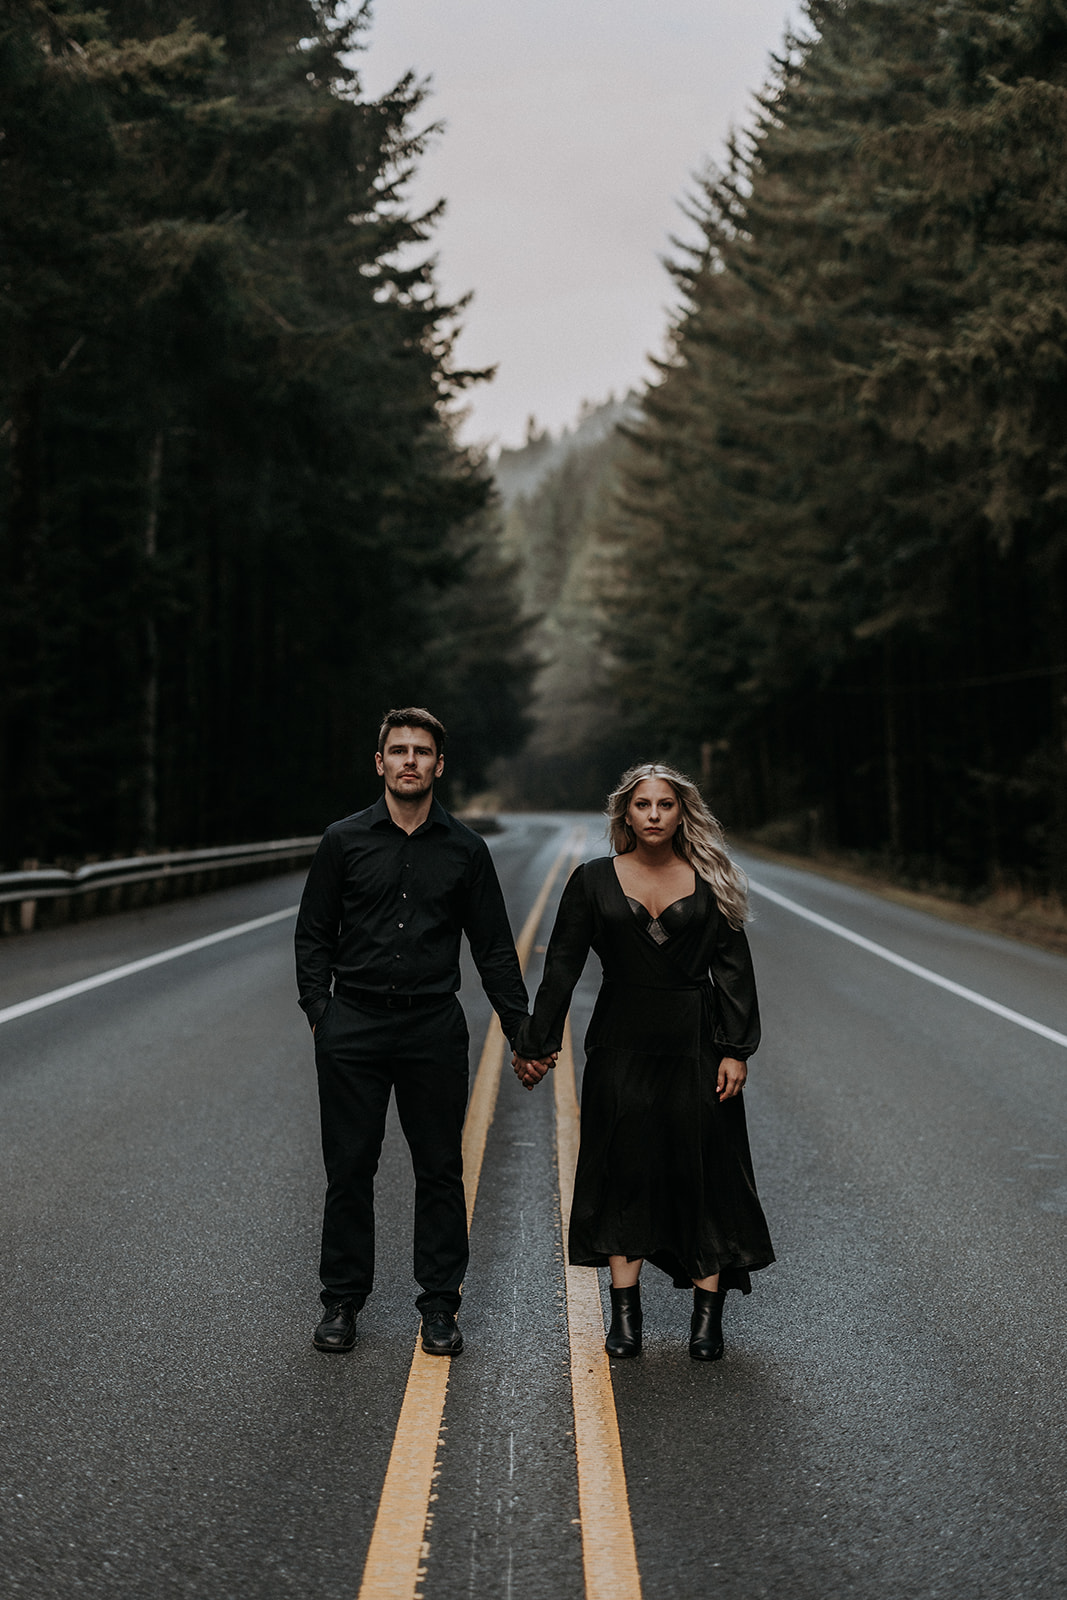 An elopement couple wearing all black with serious faces holding hands on a road in Southern Oregon with pine trees.